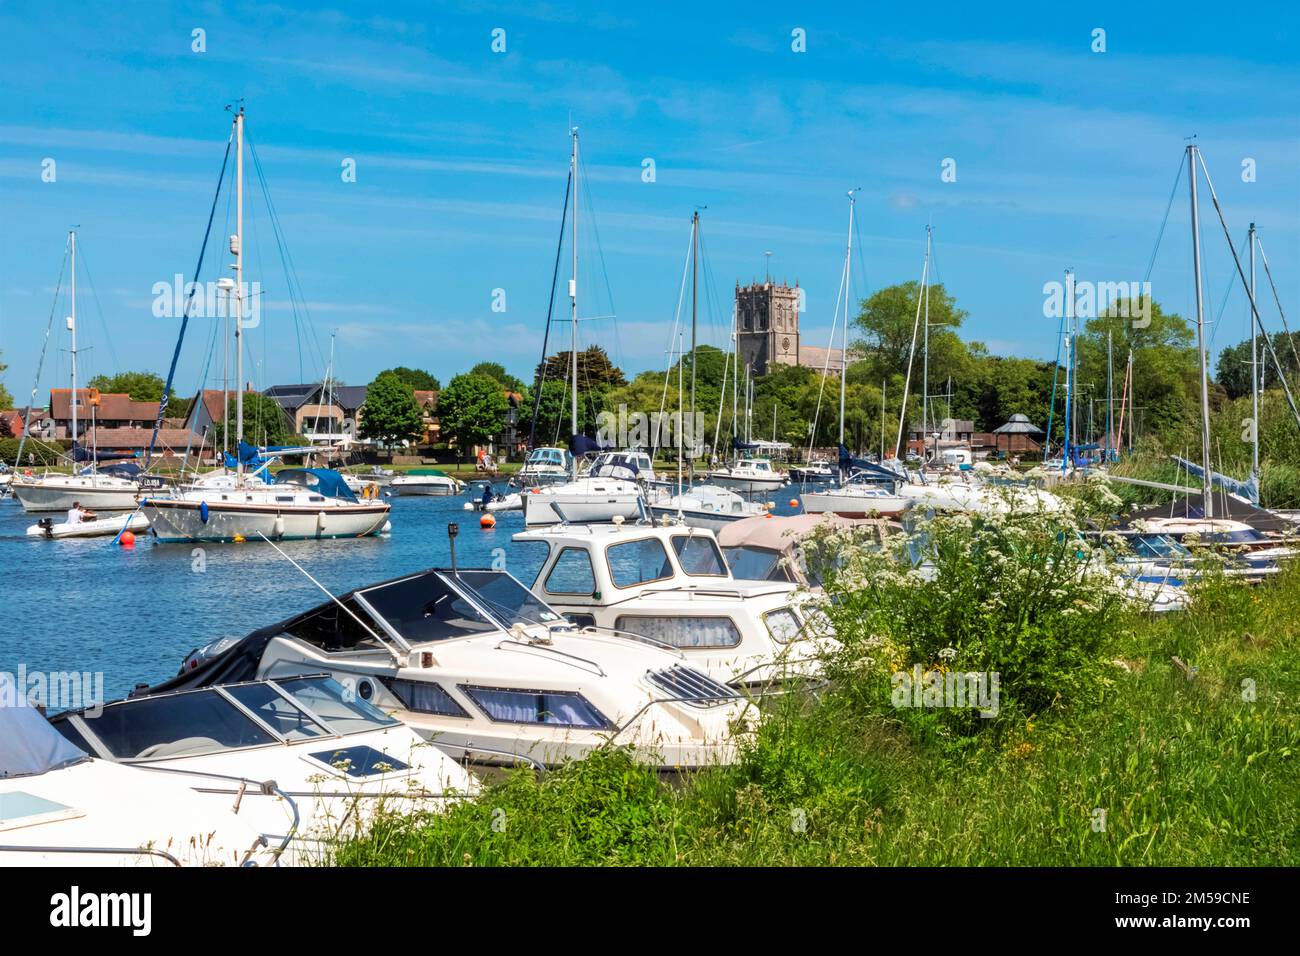 England, Dorset, Christchurch, Yachts on The River Stour and Christchurch Priory *** Local Caption ***  UK,United Kingdom,Great Britain,Britain,Englan Stock Photo